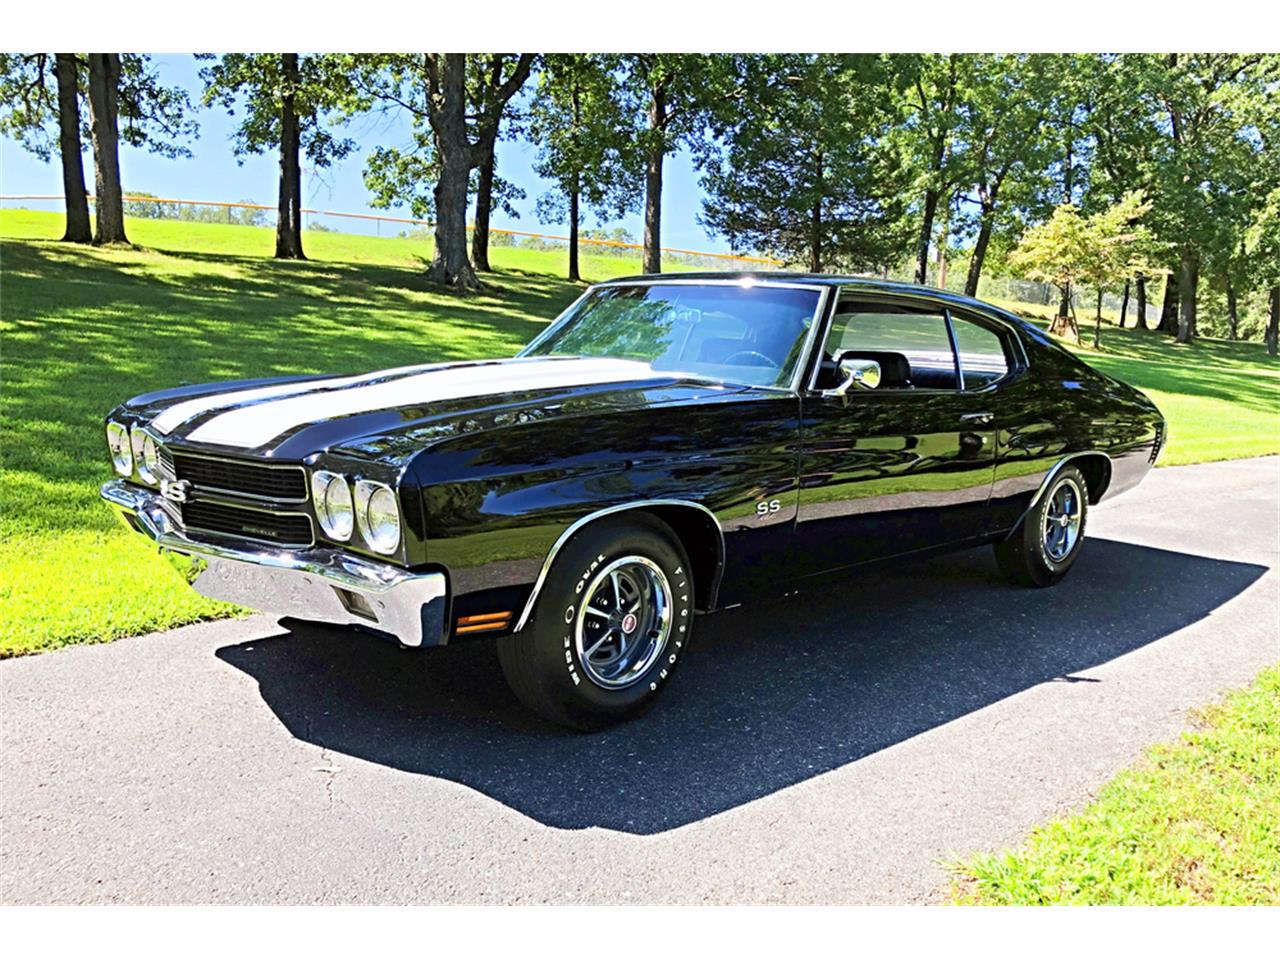 For Sale at Auction: 1970 Chevrolet Chevelle in Las Vegas, Nevada.